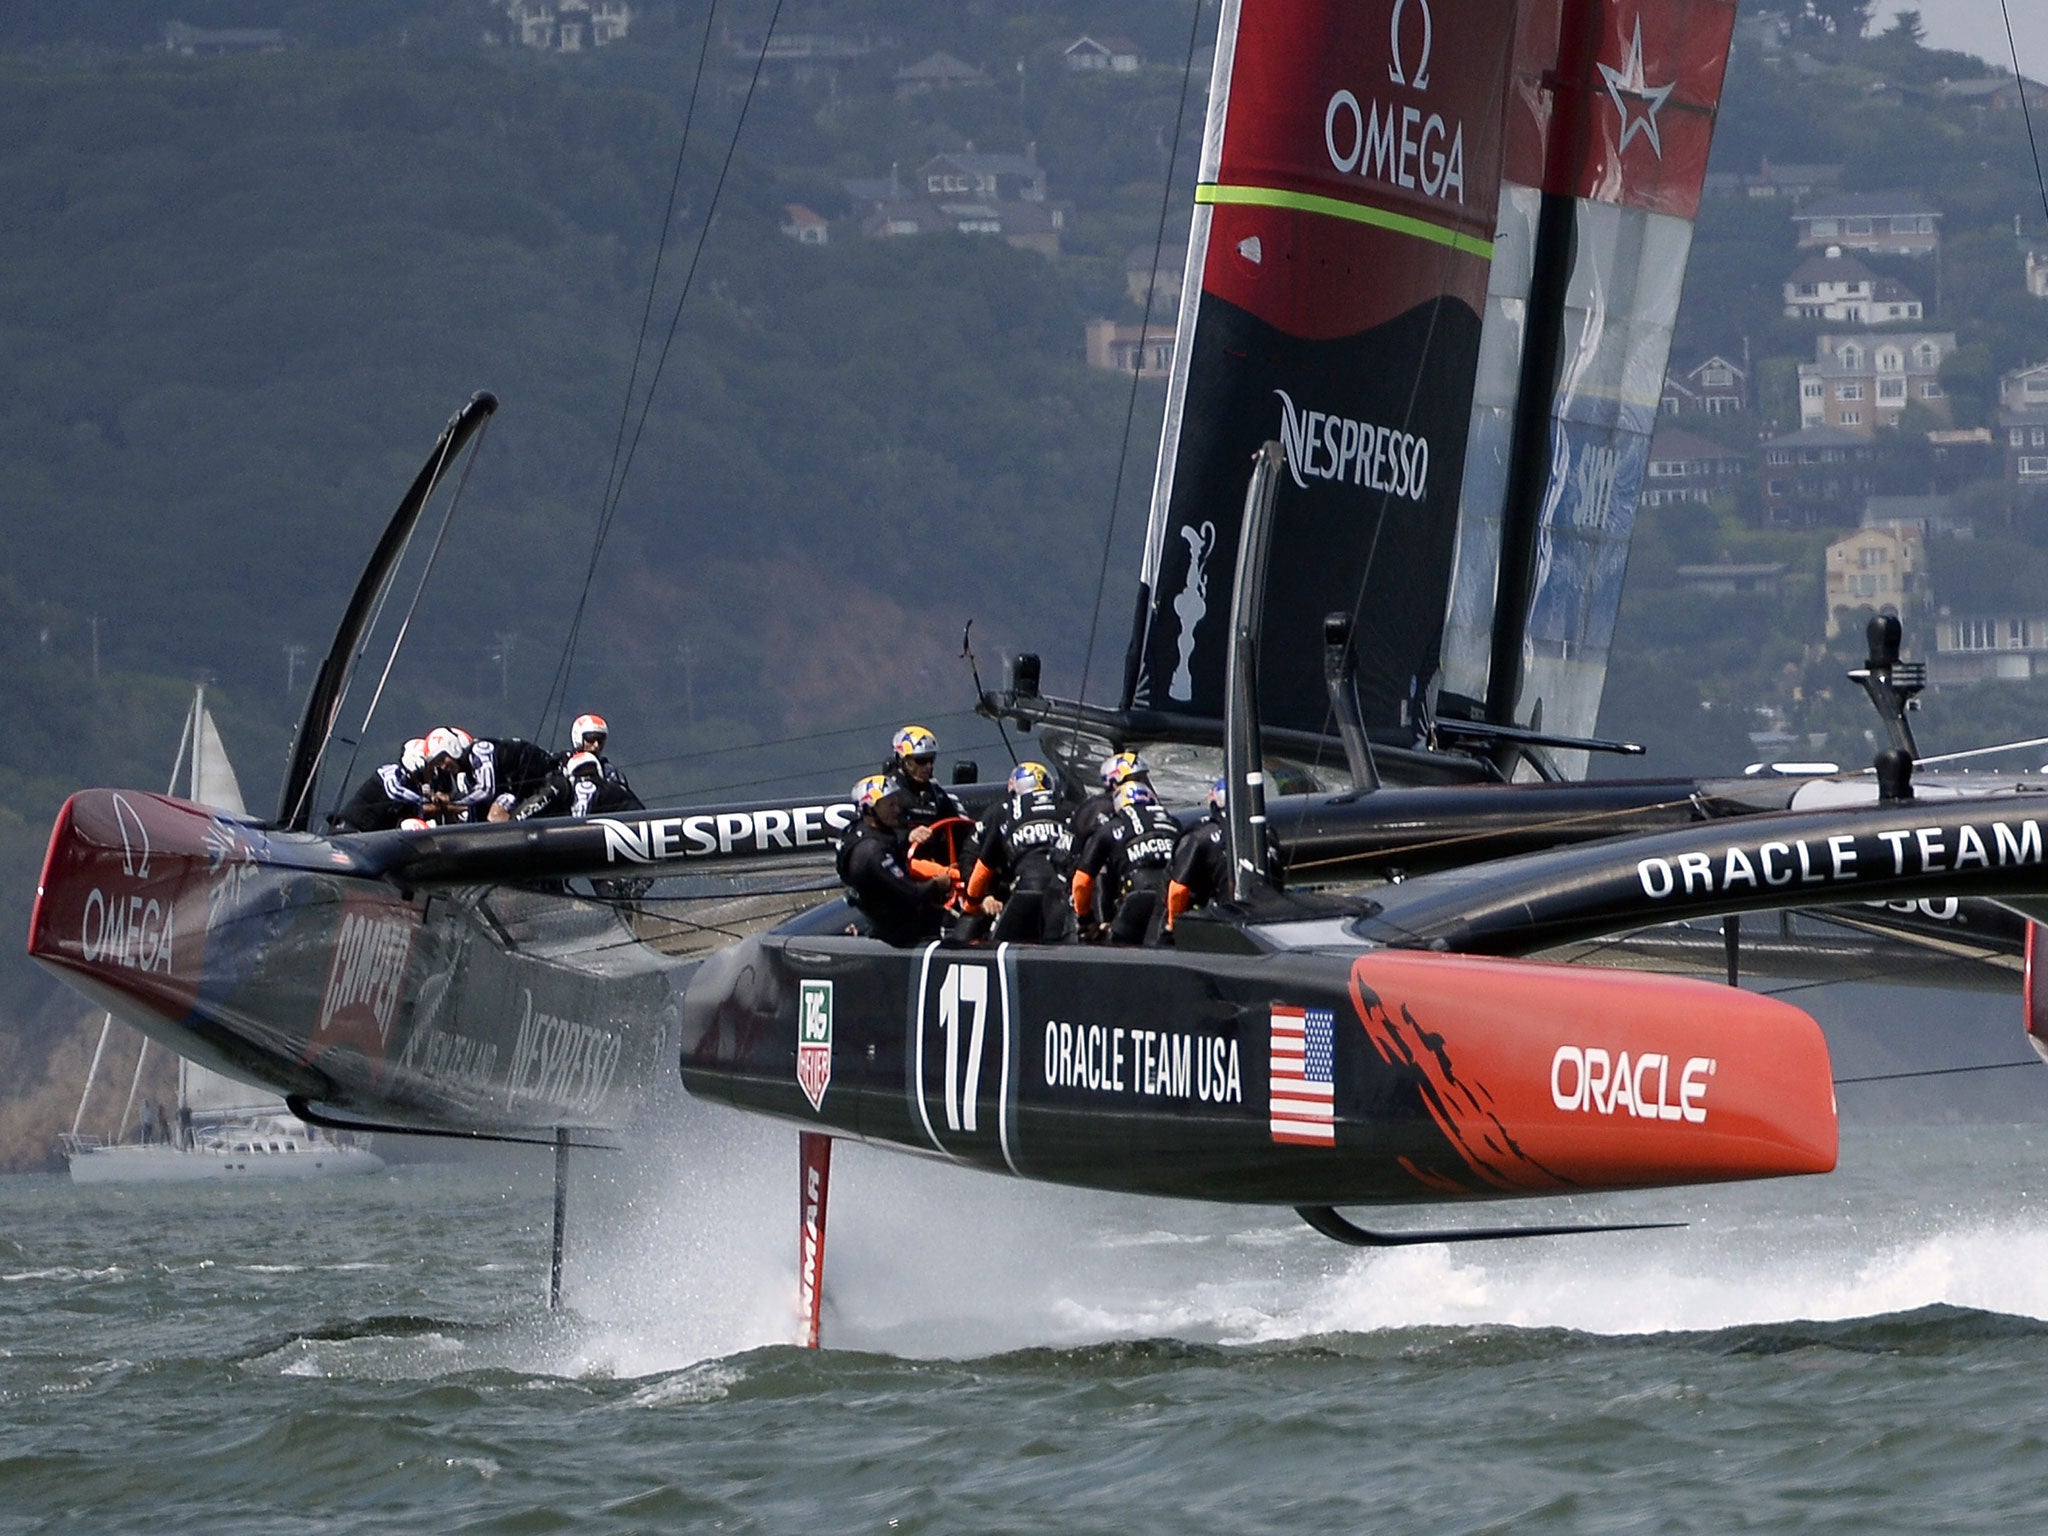 Oracle Team USA race against their gritty challengers from Emirates Team New Zealand